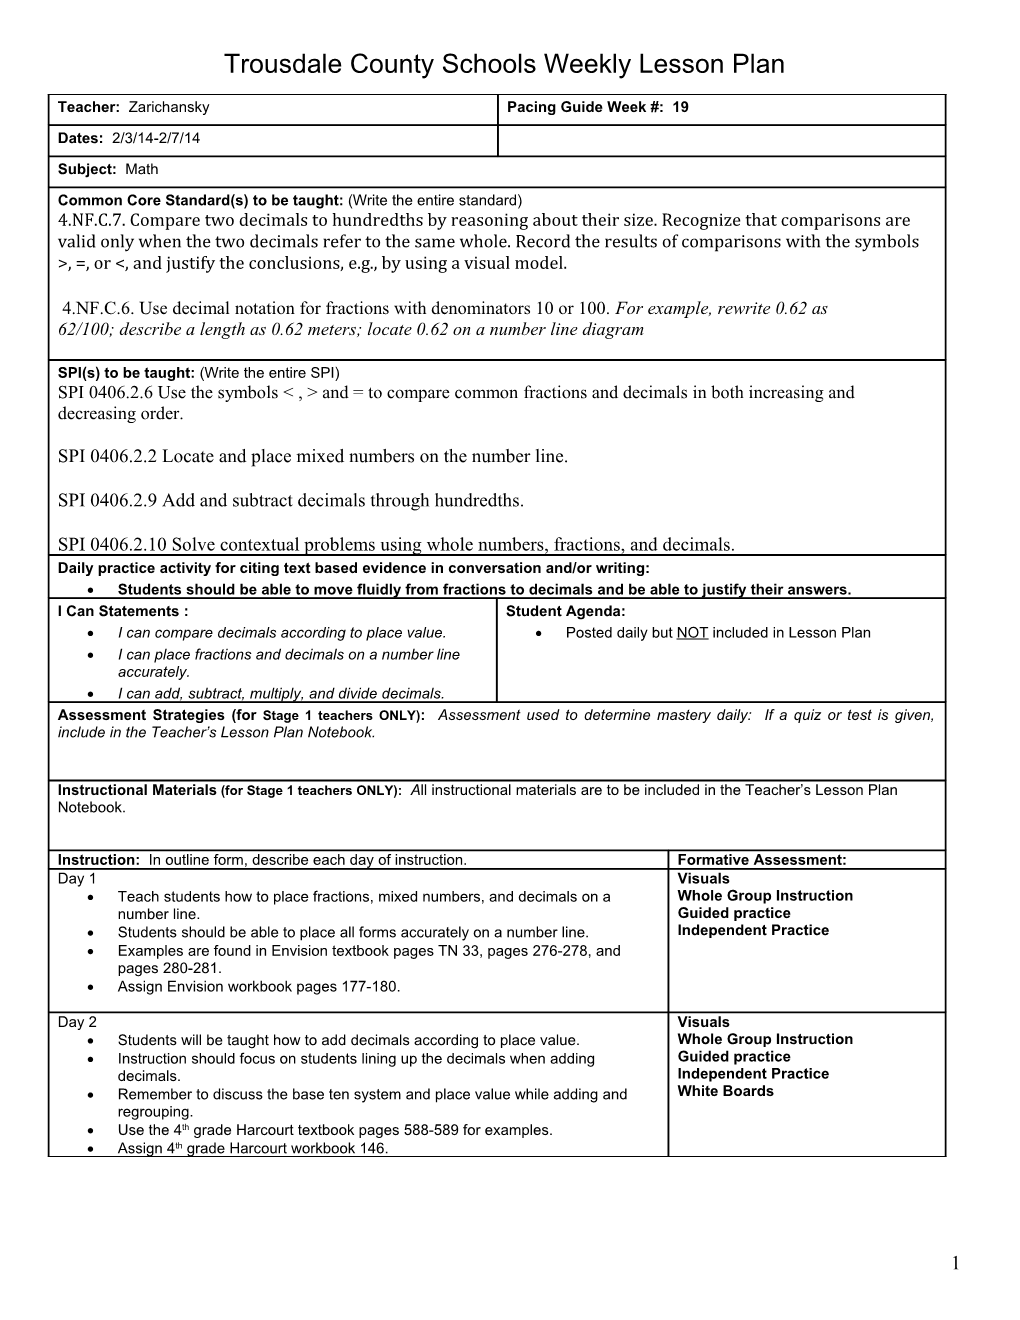 Lesson Plan Template s41